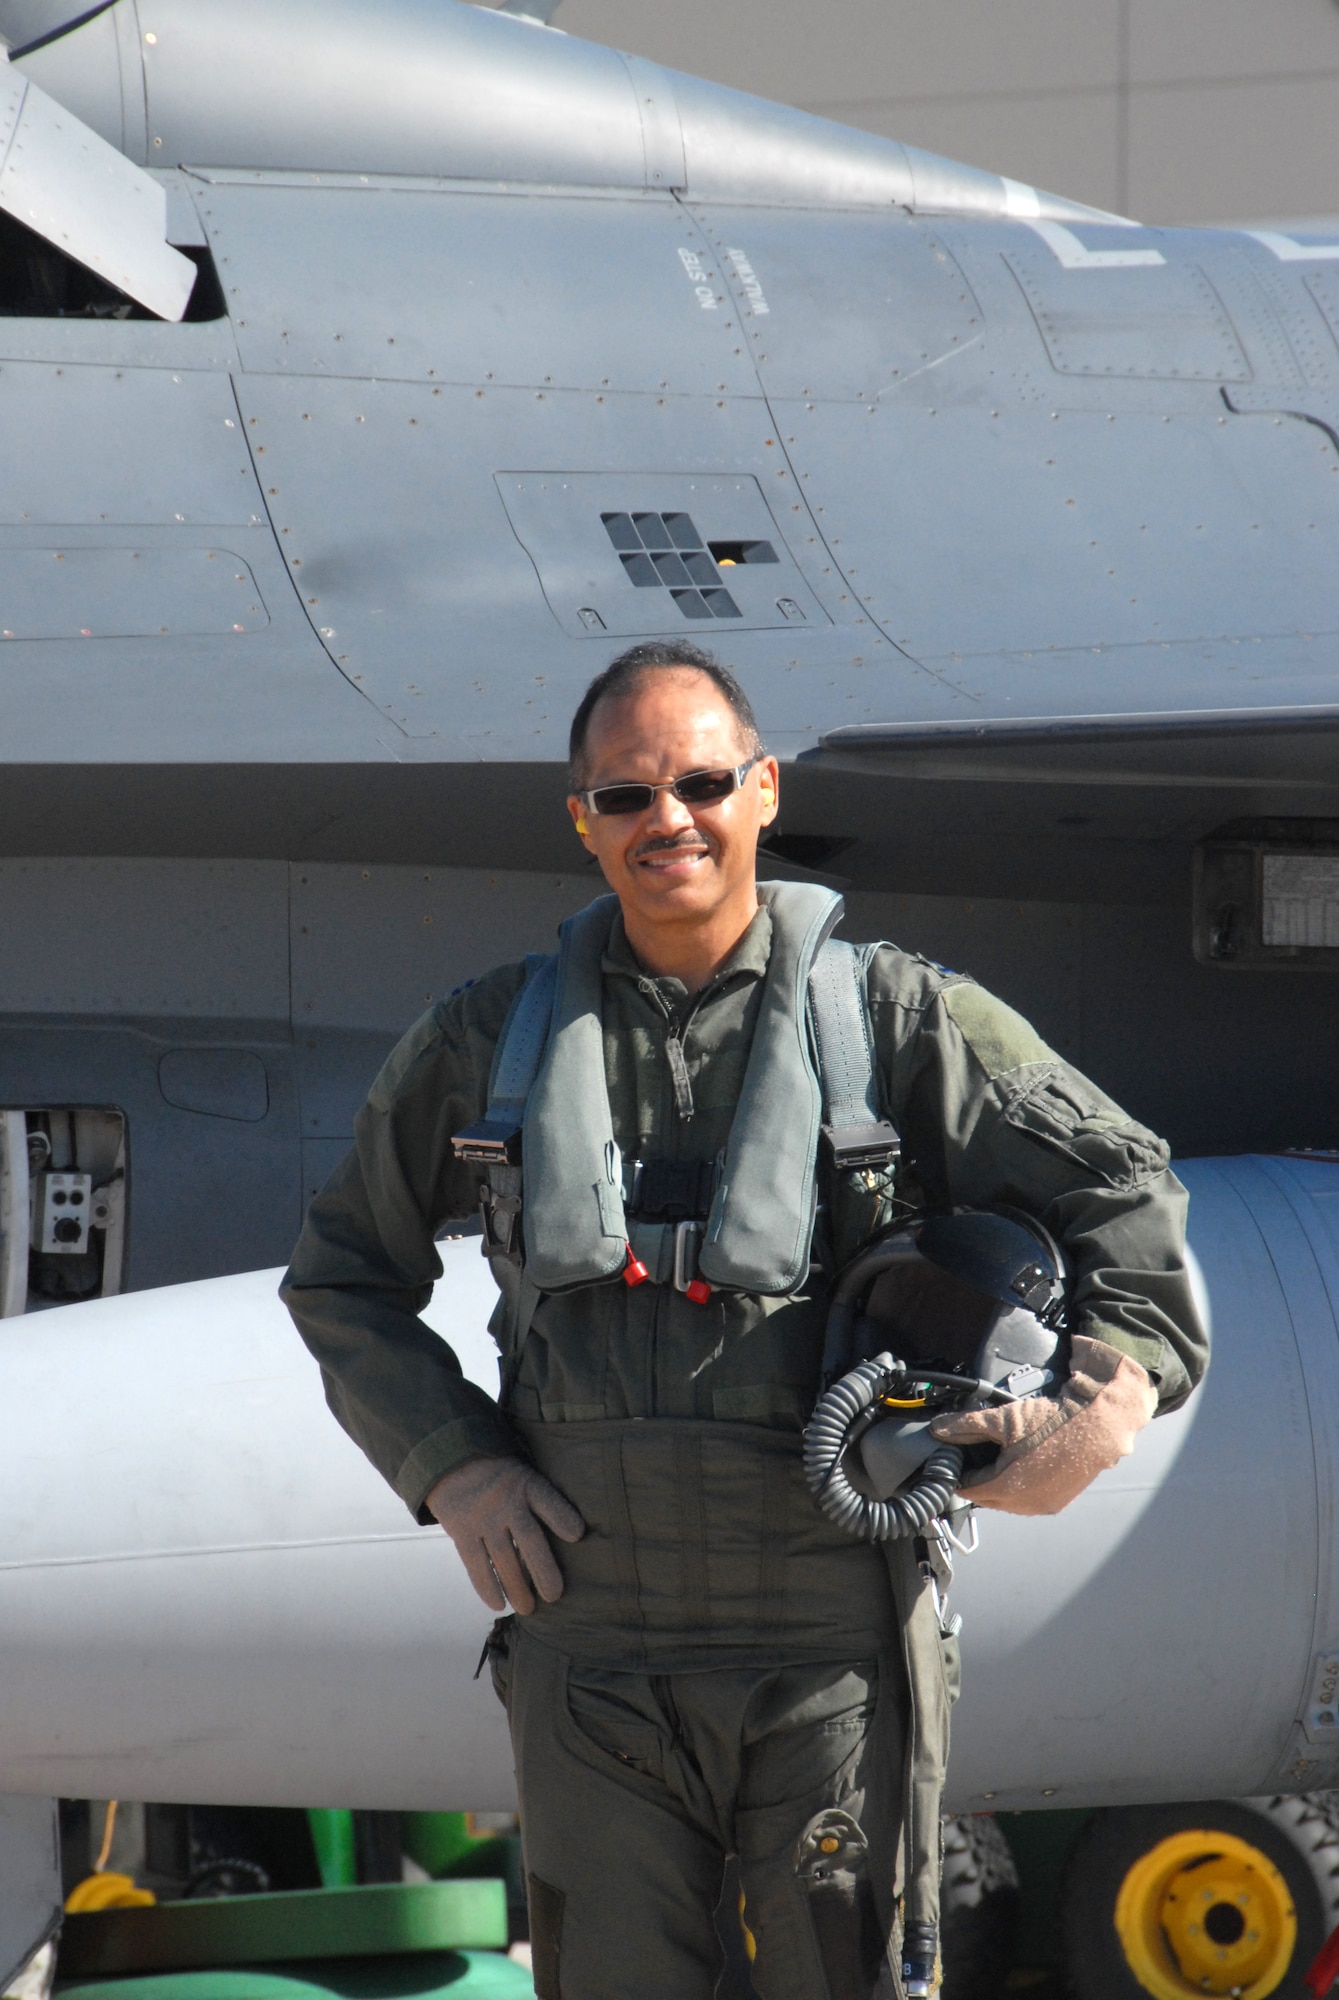 Lt. Col. Thompson
180th Vice Wing Commander